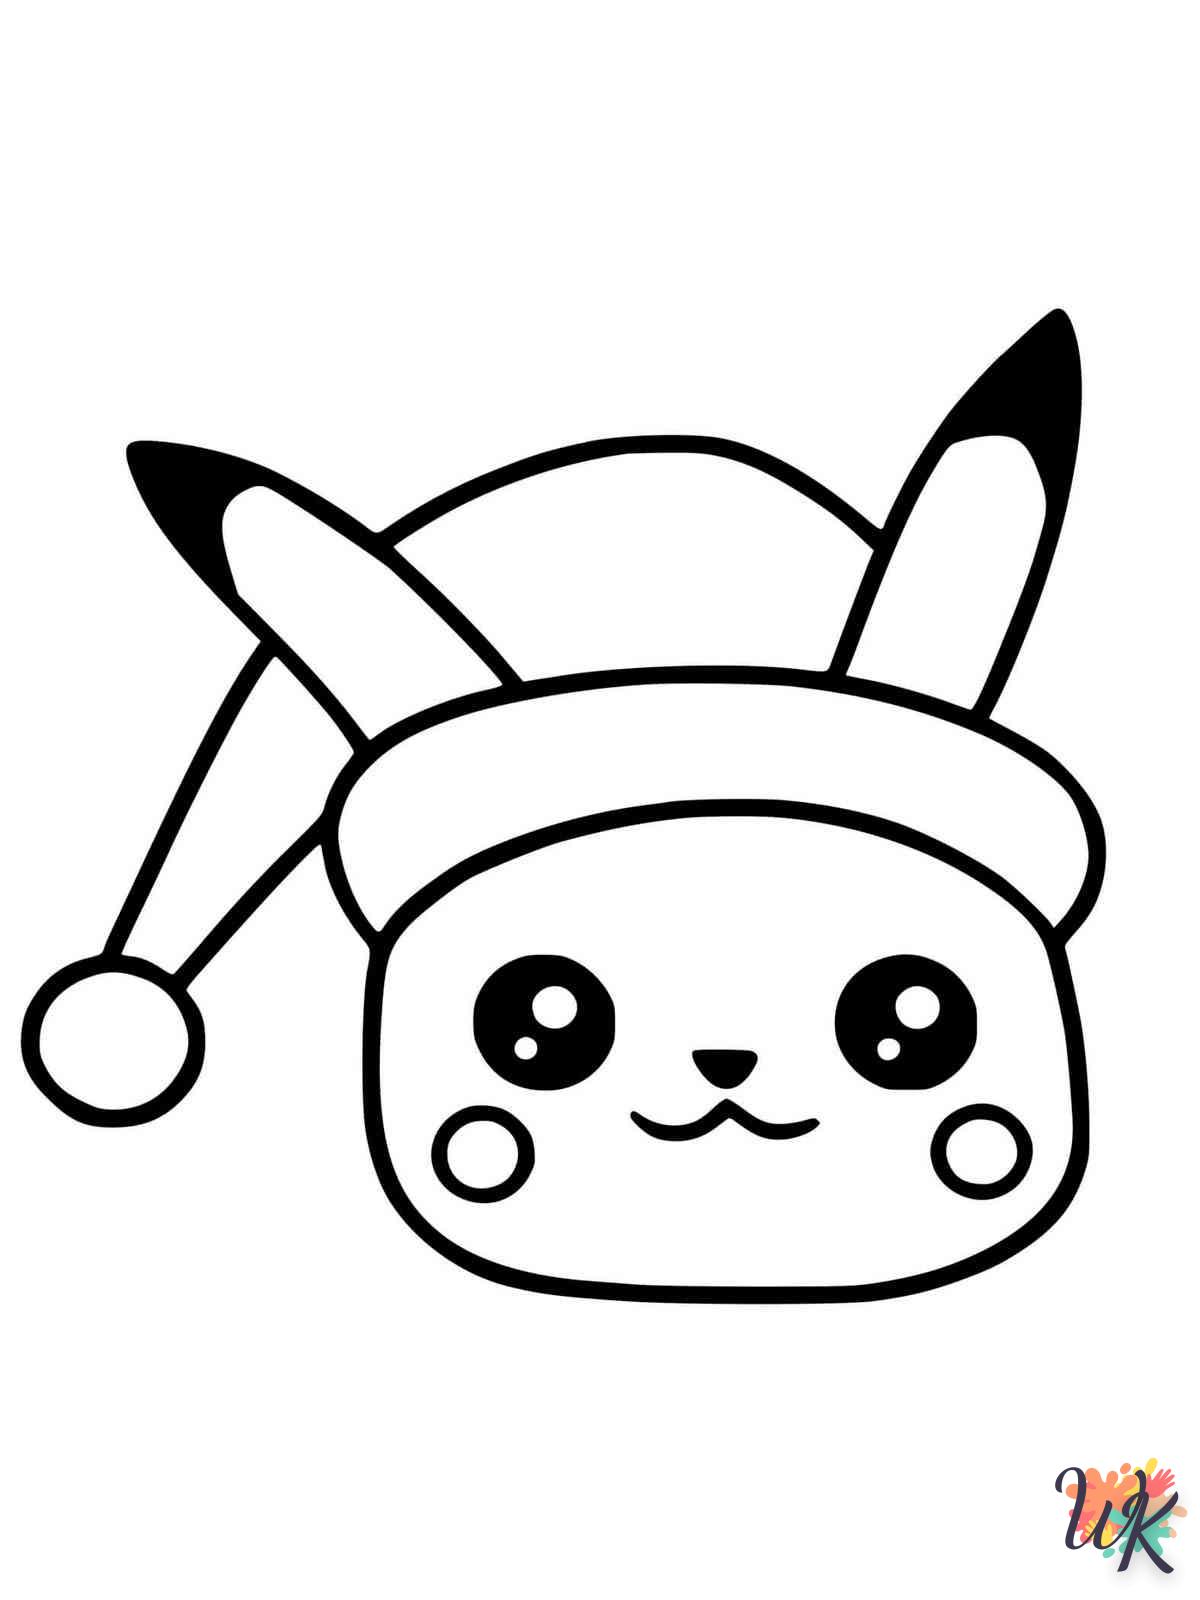 free printable Pikachu coloring pages